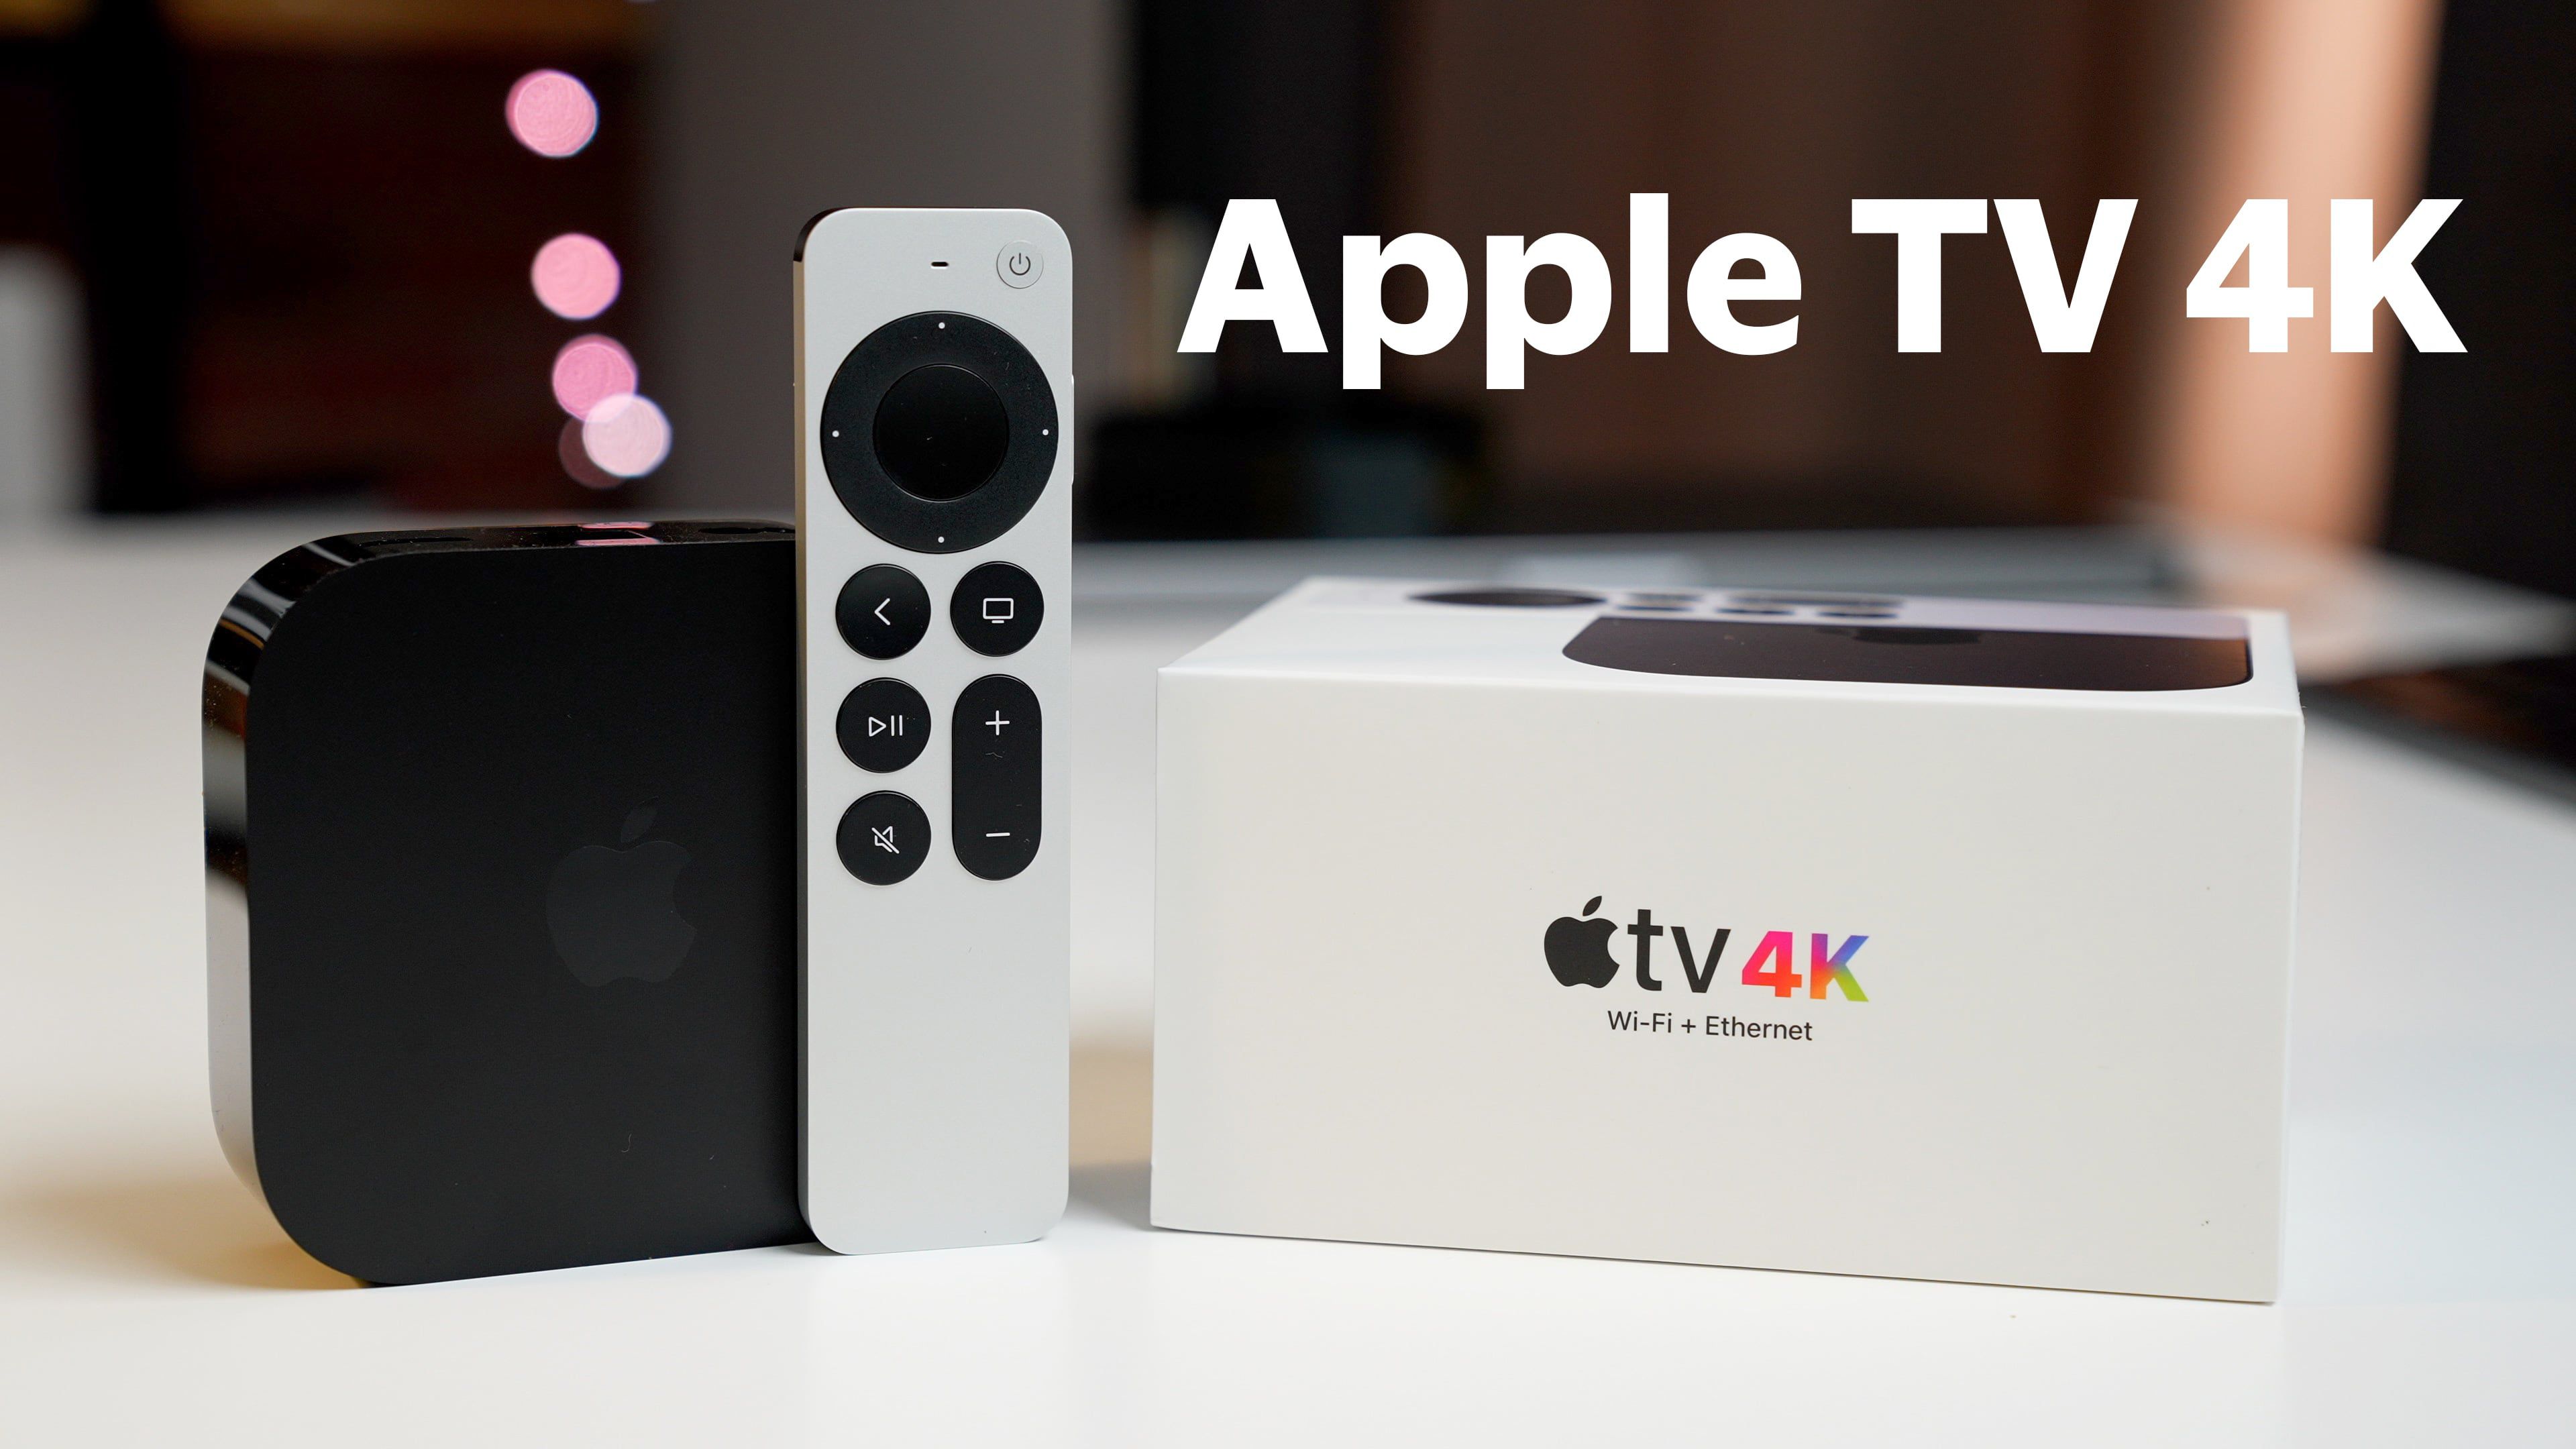 Hands-On With the New Apple TV 4K